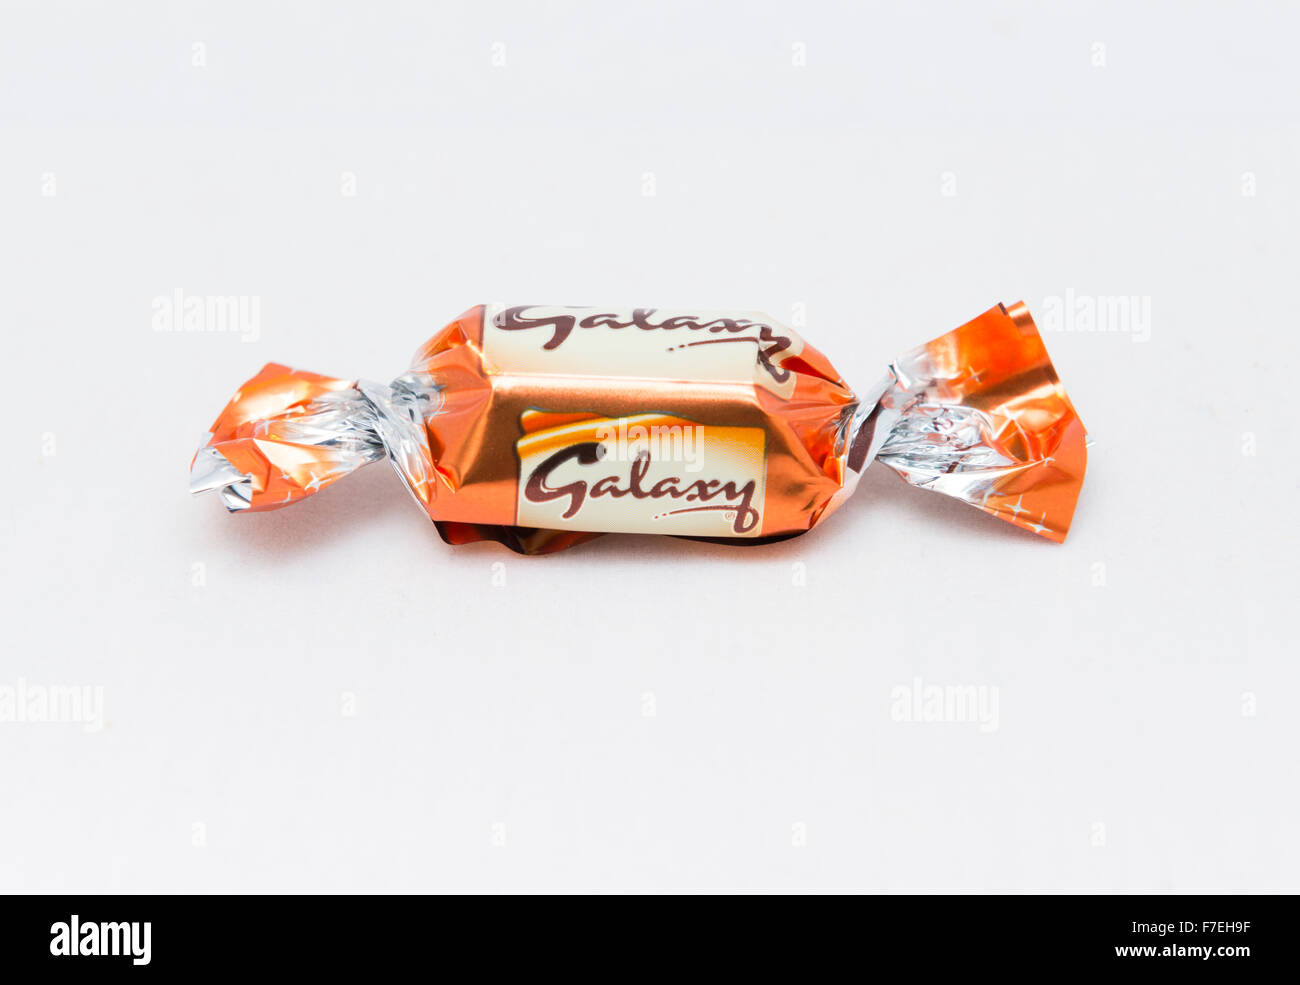 A Galaxy chocolate from a tin of Celebrations. Stock Photo